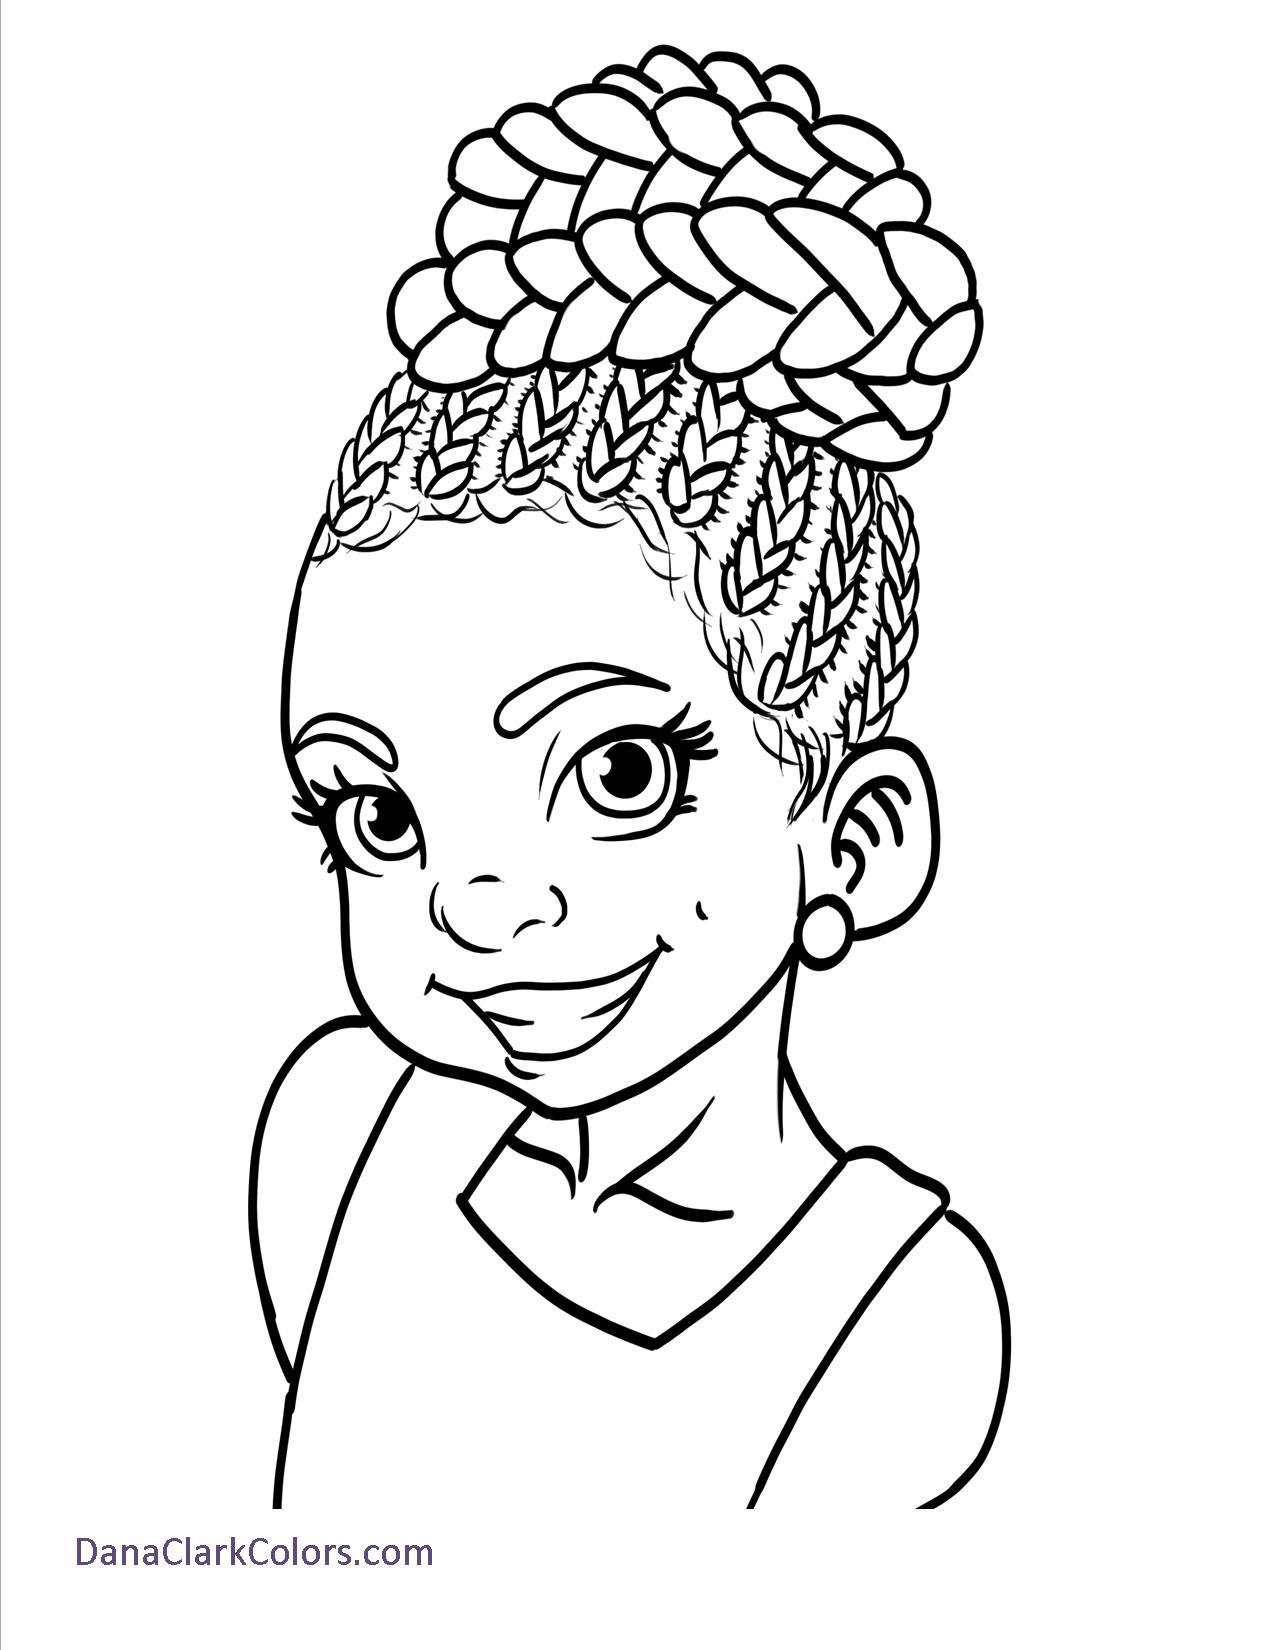 free girl coloring pages free coloring pages danaclarkcolorscom girl free pages coloring 